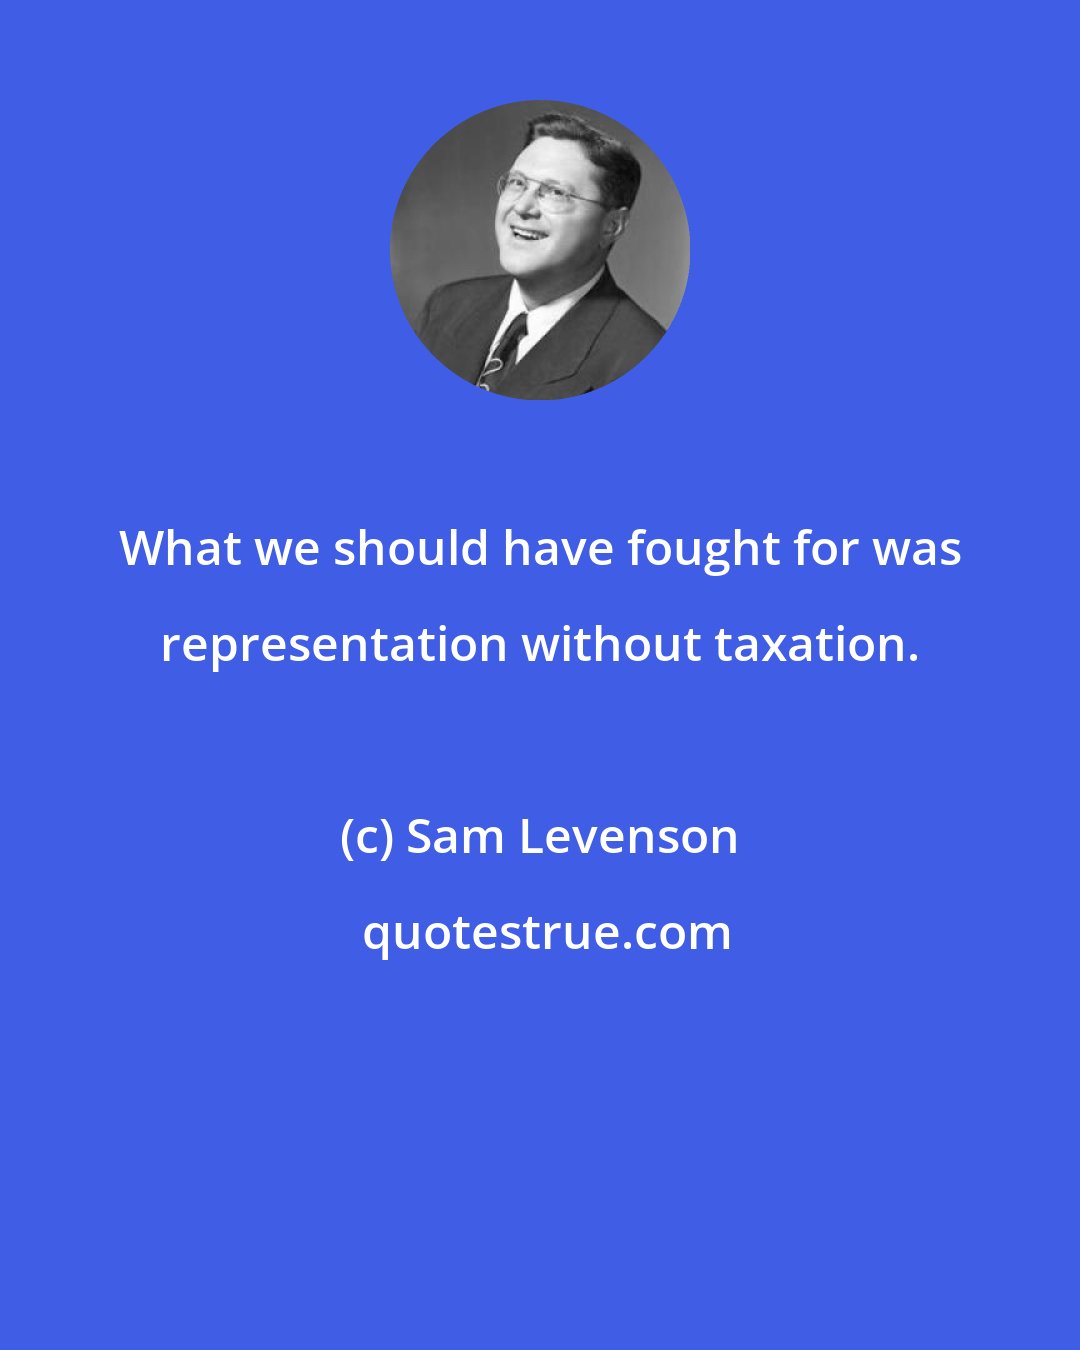 Sam Levenson: What we should have fought for was representation without taxation.